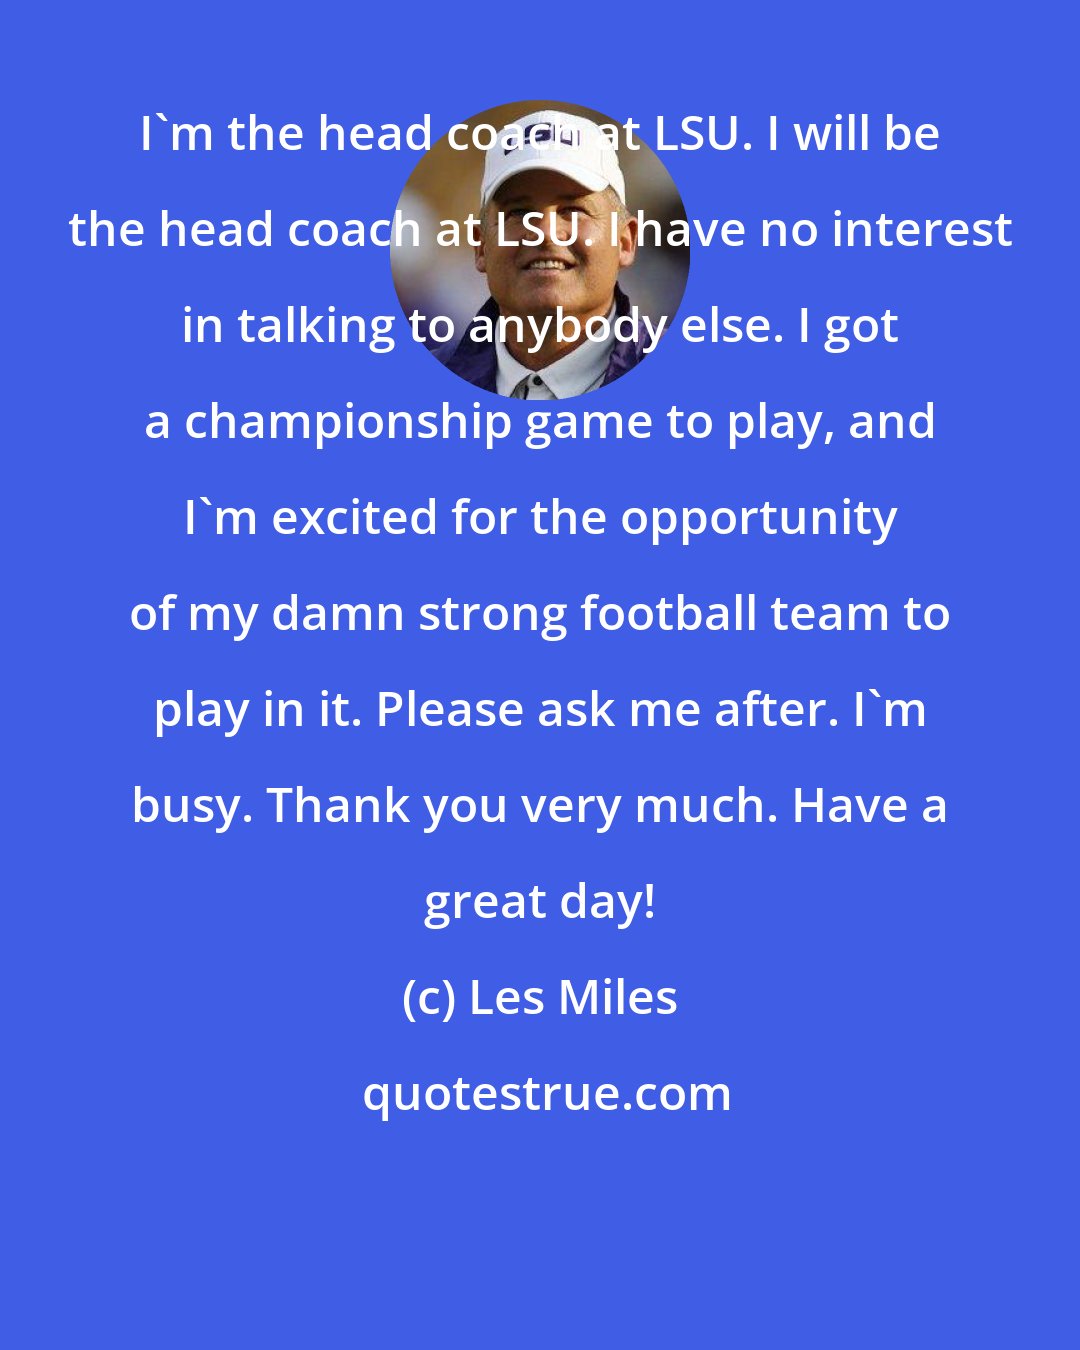 Les Miles: I'm the head coach at LSU. I will be the head coach at LSU. I have no interest in talking to anybody else. I got a championship game to play, and I'm excited for the opportunity of my damn strong football team to play in it. Please ask me after. I'm busy. Thank you very much. Have a great day!